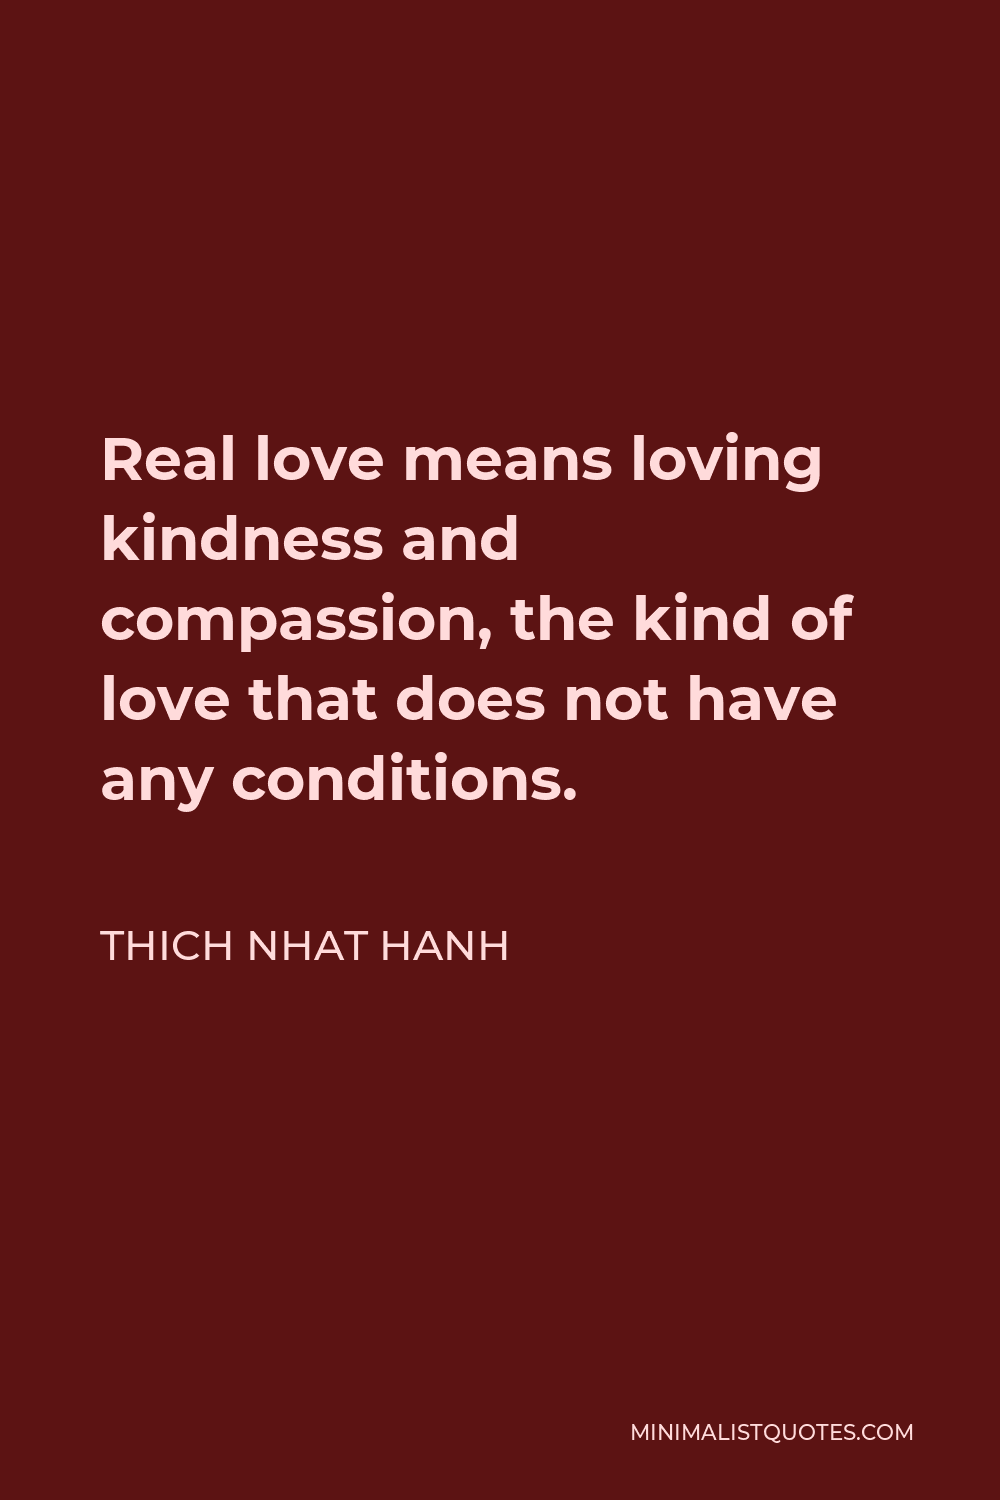 Thich Nhat Hanh Quote - Real love means loving kindness and compassion, the kind of love that does not have any conditions.